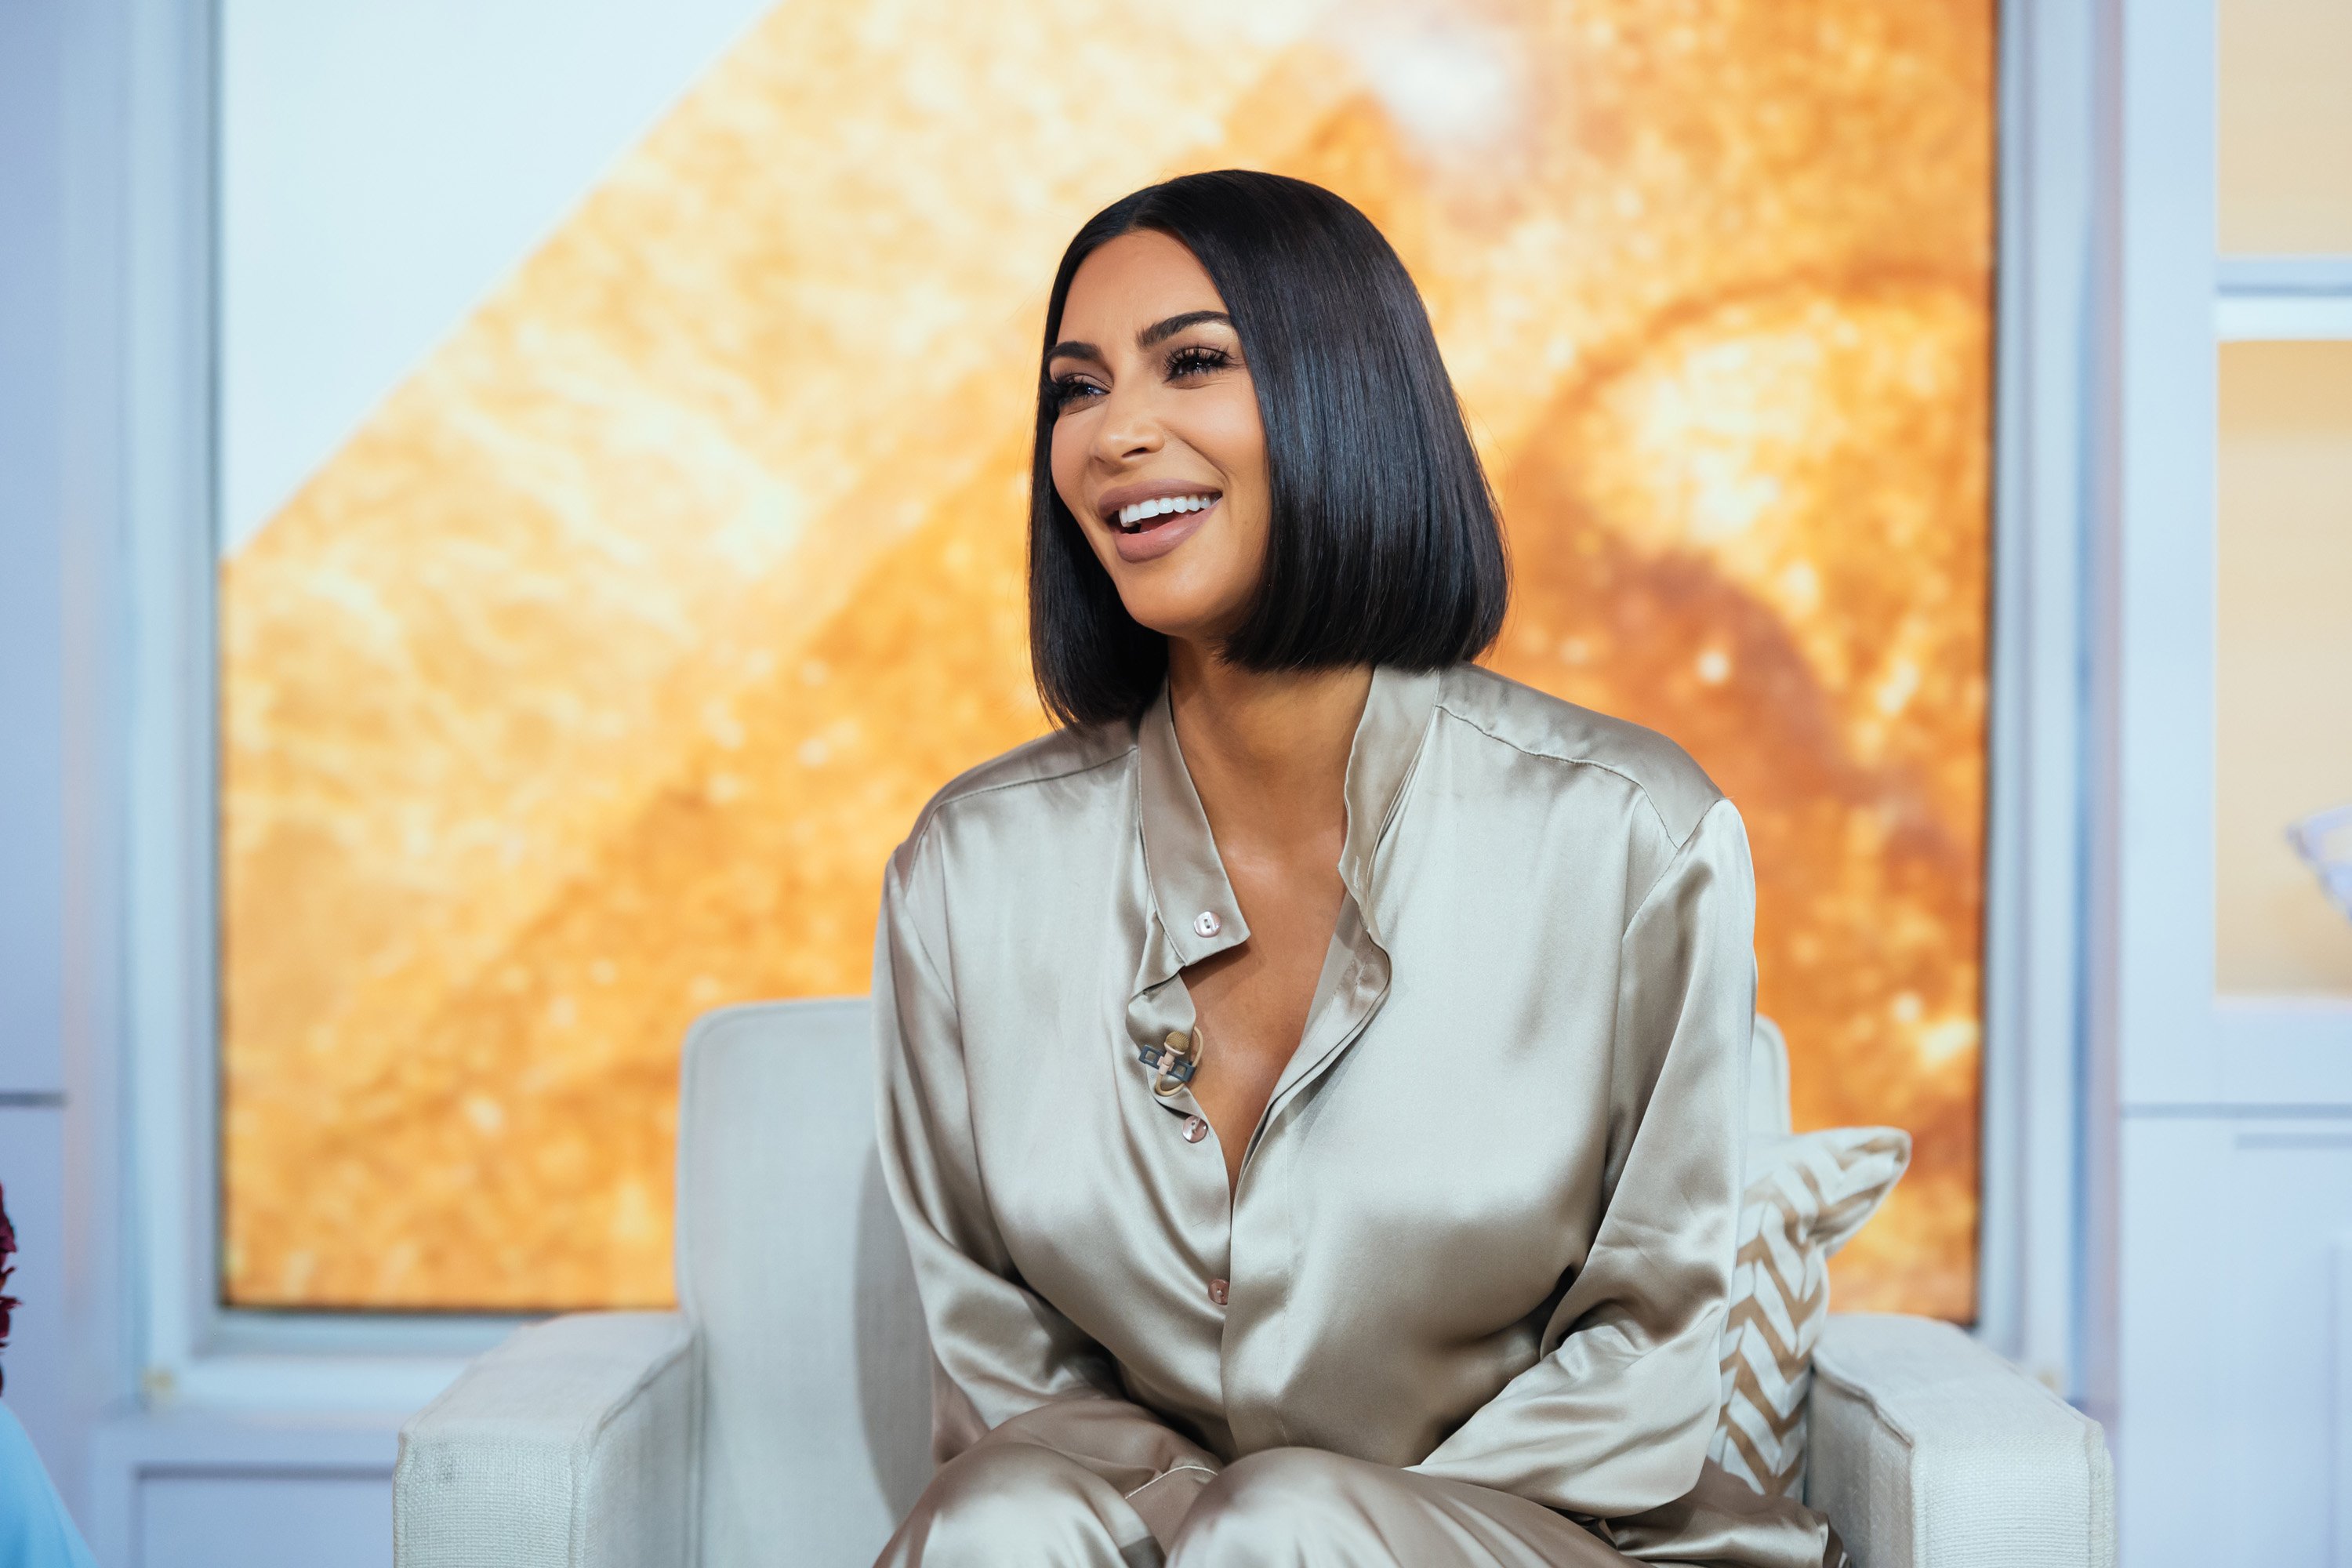 Kim Kardashian West on the set of “Today” on Tuesday, September 10, 2019. | Source: Getty Images